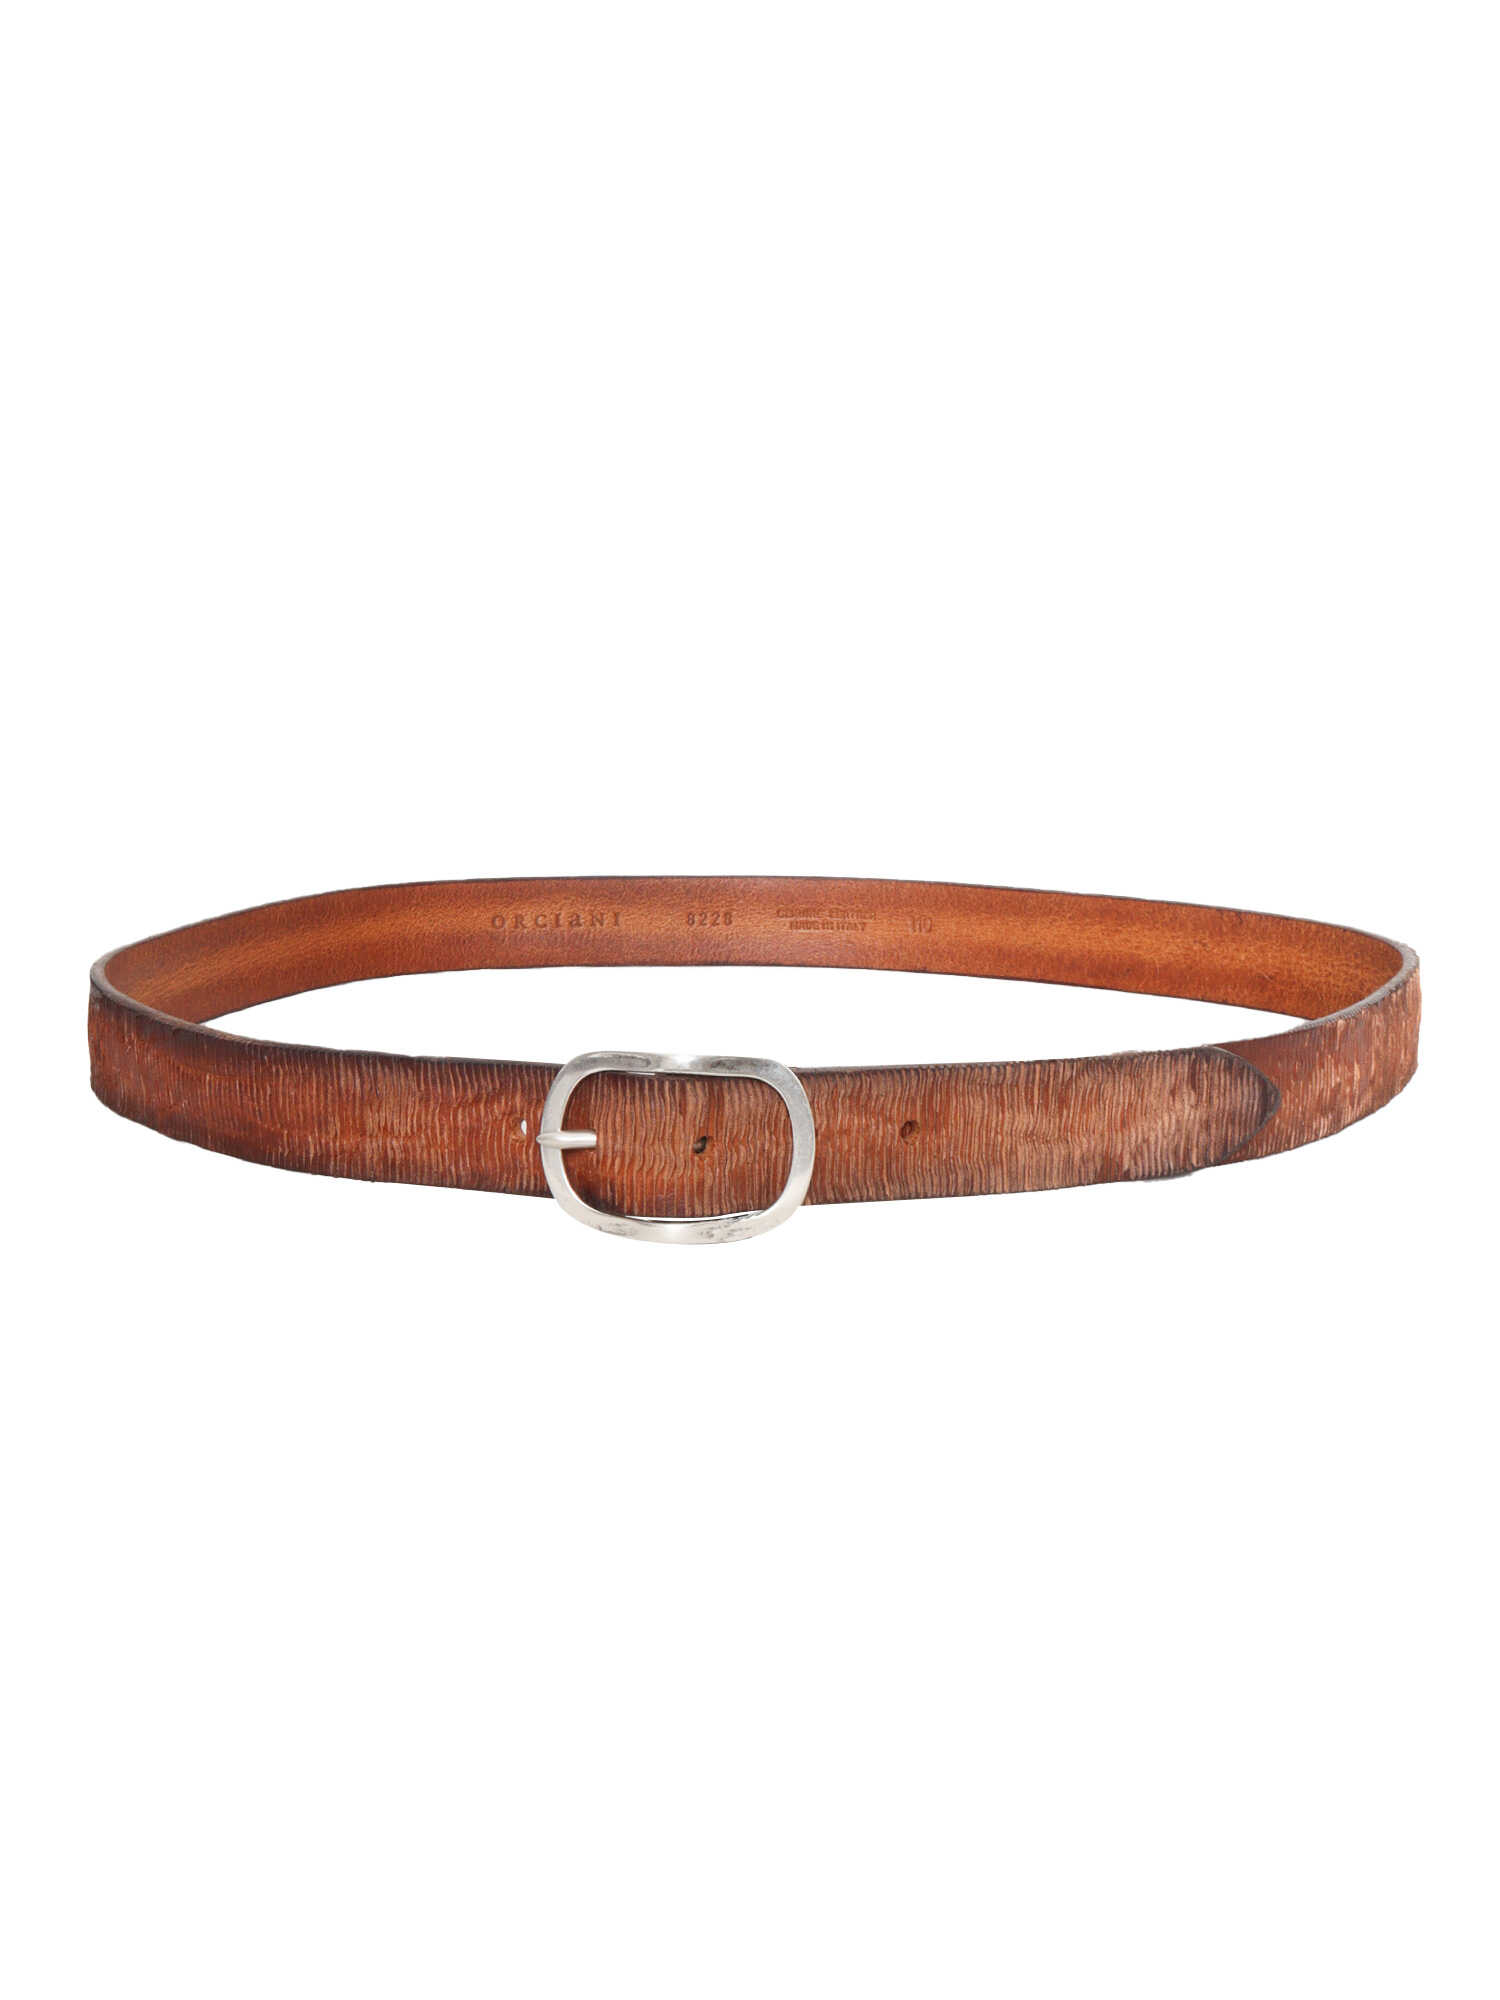 Claudio Orciani Knurled belt Brown